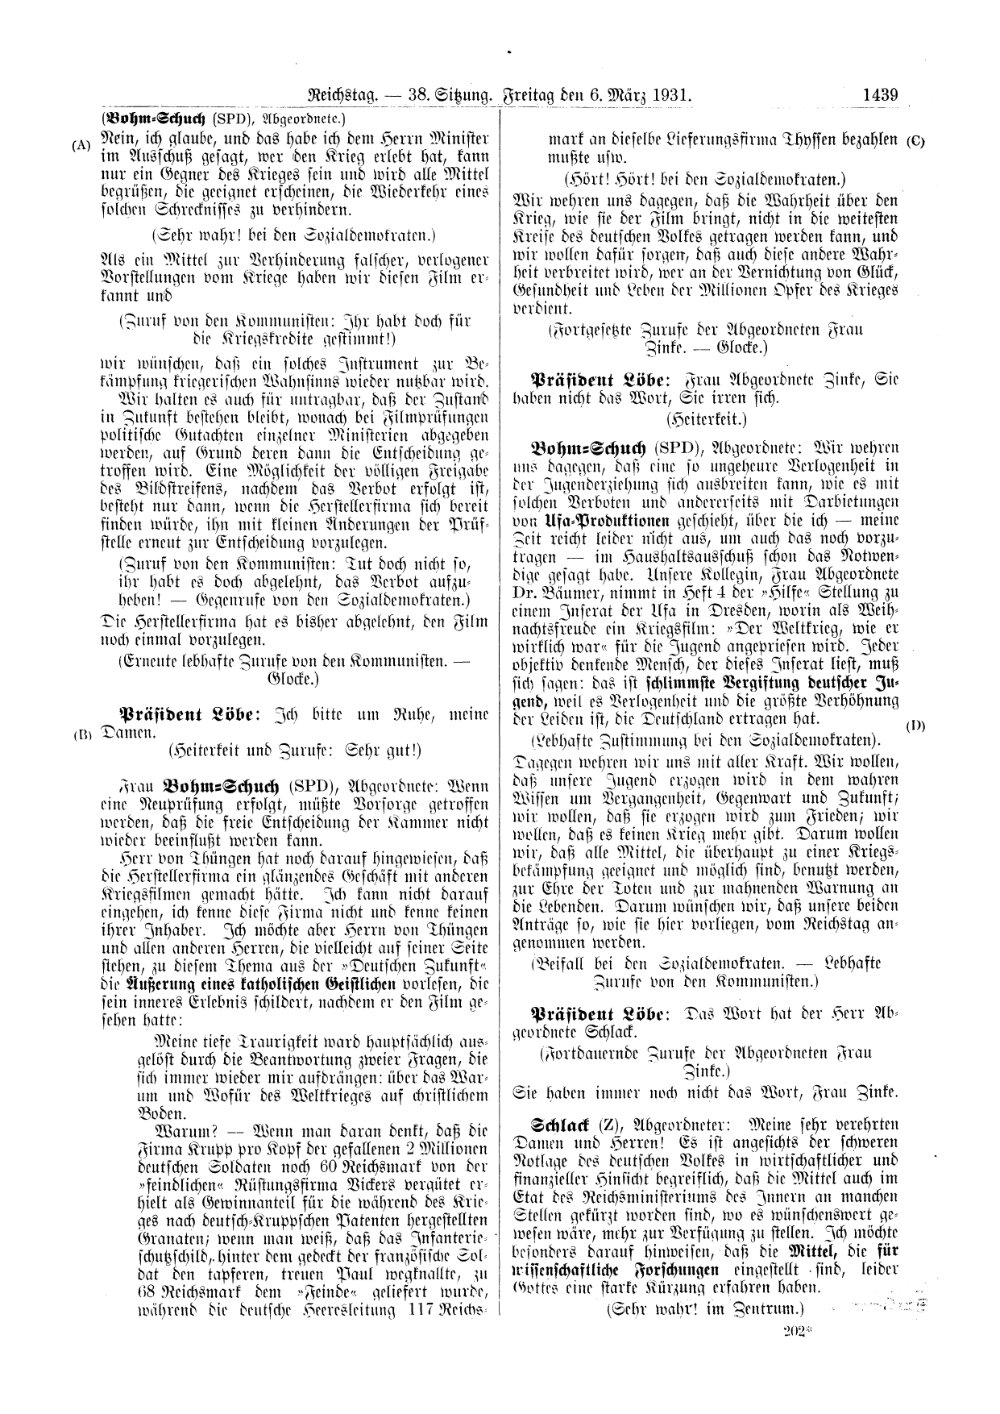 Scan of page 1439